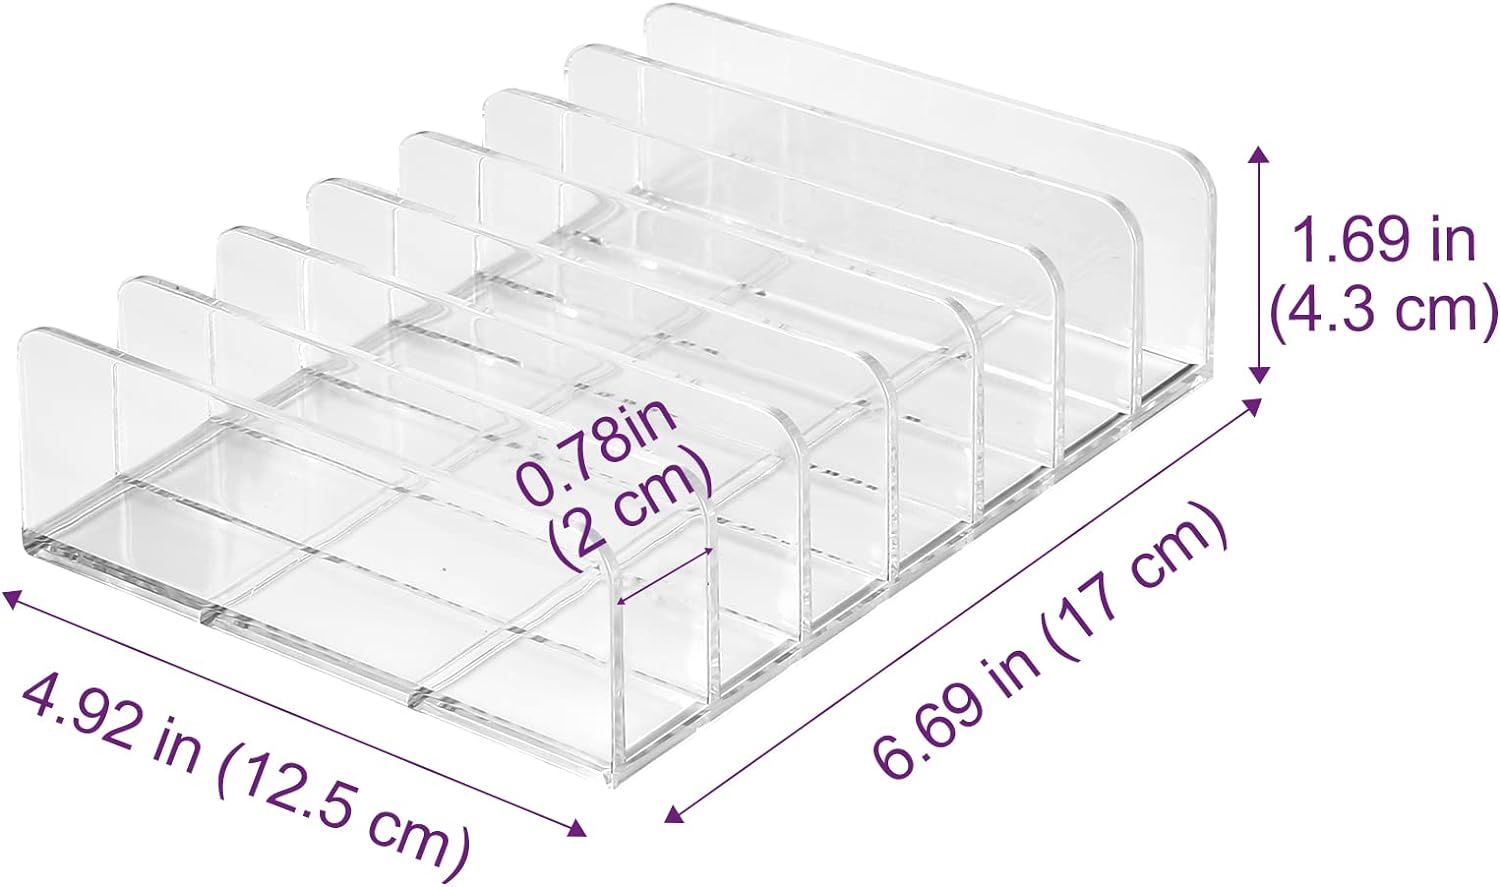 [2 Pack] Lolalet Clear Acrylic Makeup Palettes Organizer, Divided Sections Stand Rack For Eyeshadows Contours Bronzers Blush Face Powder, Cosmetics Display Storage Holder – 14 Slots